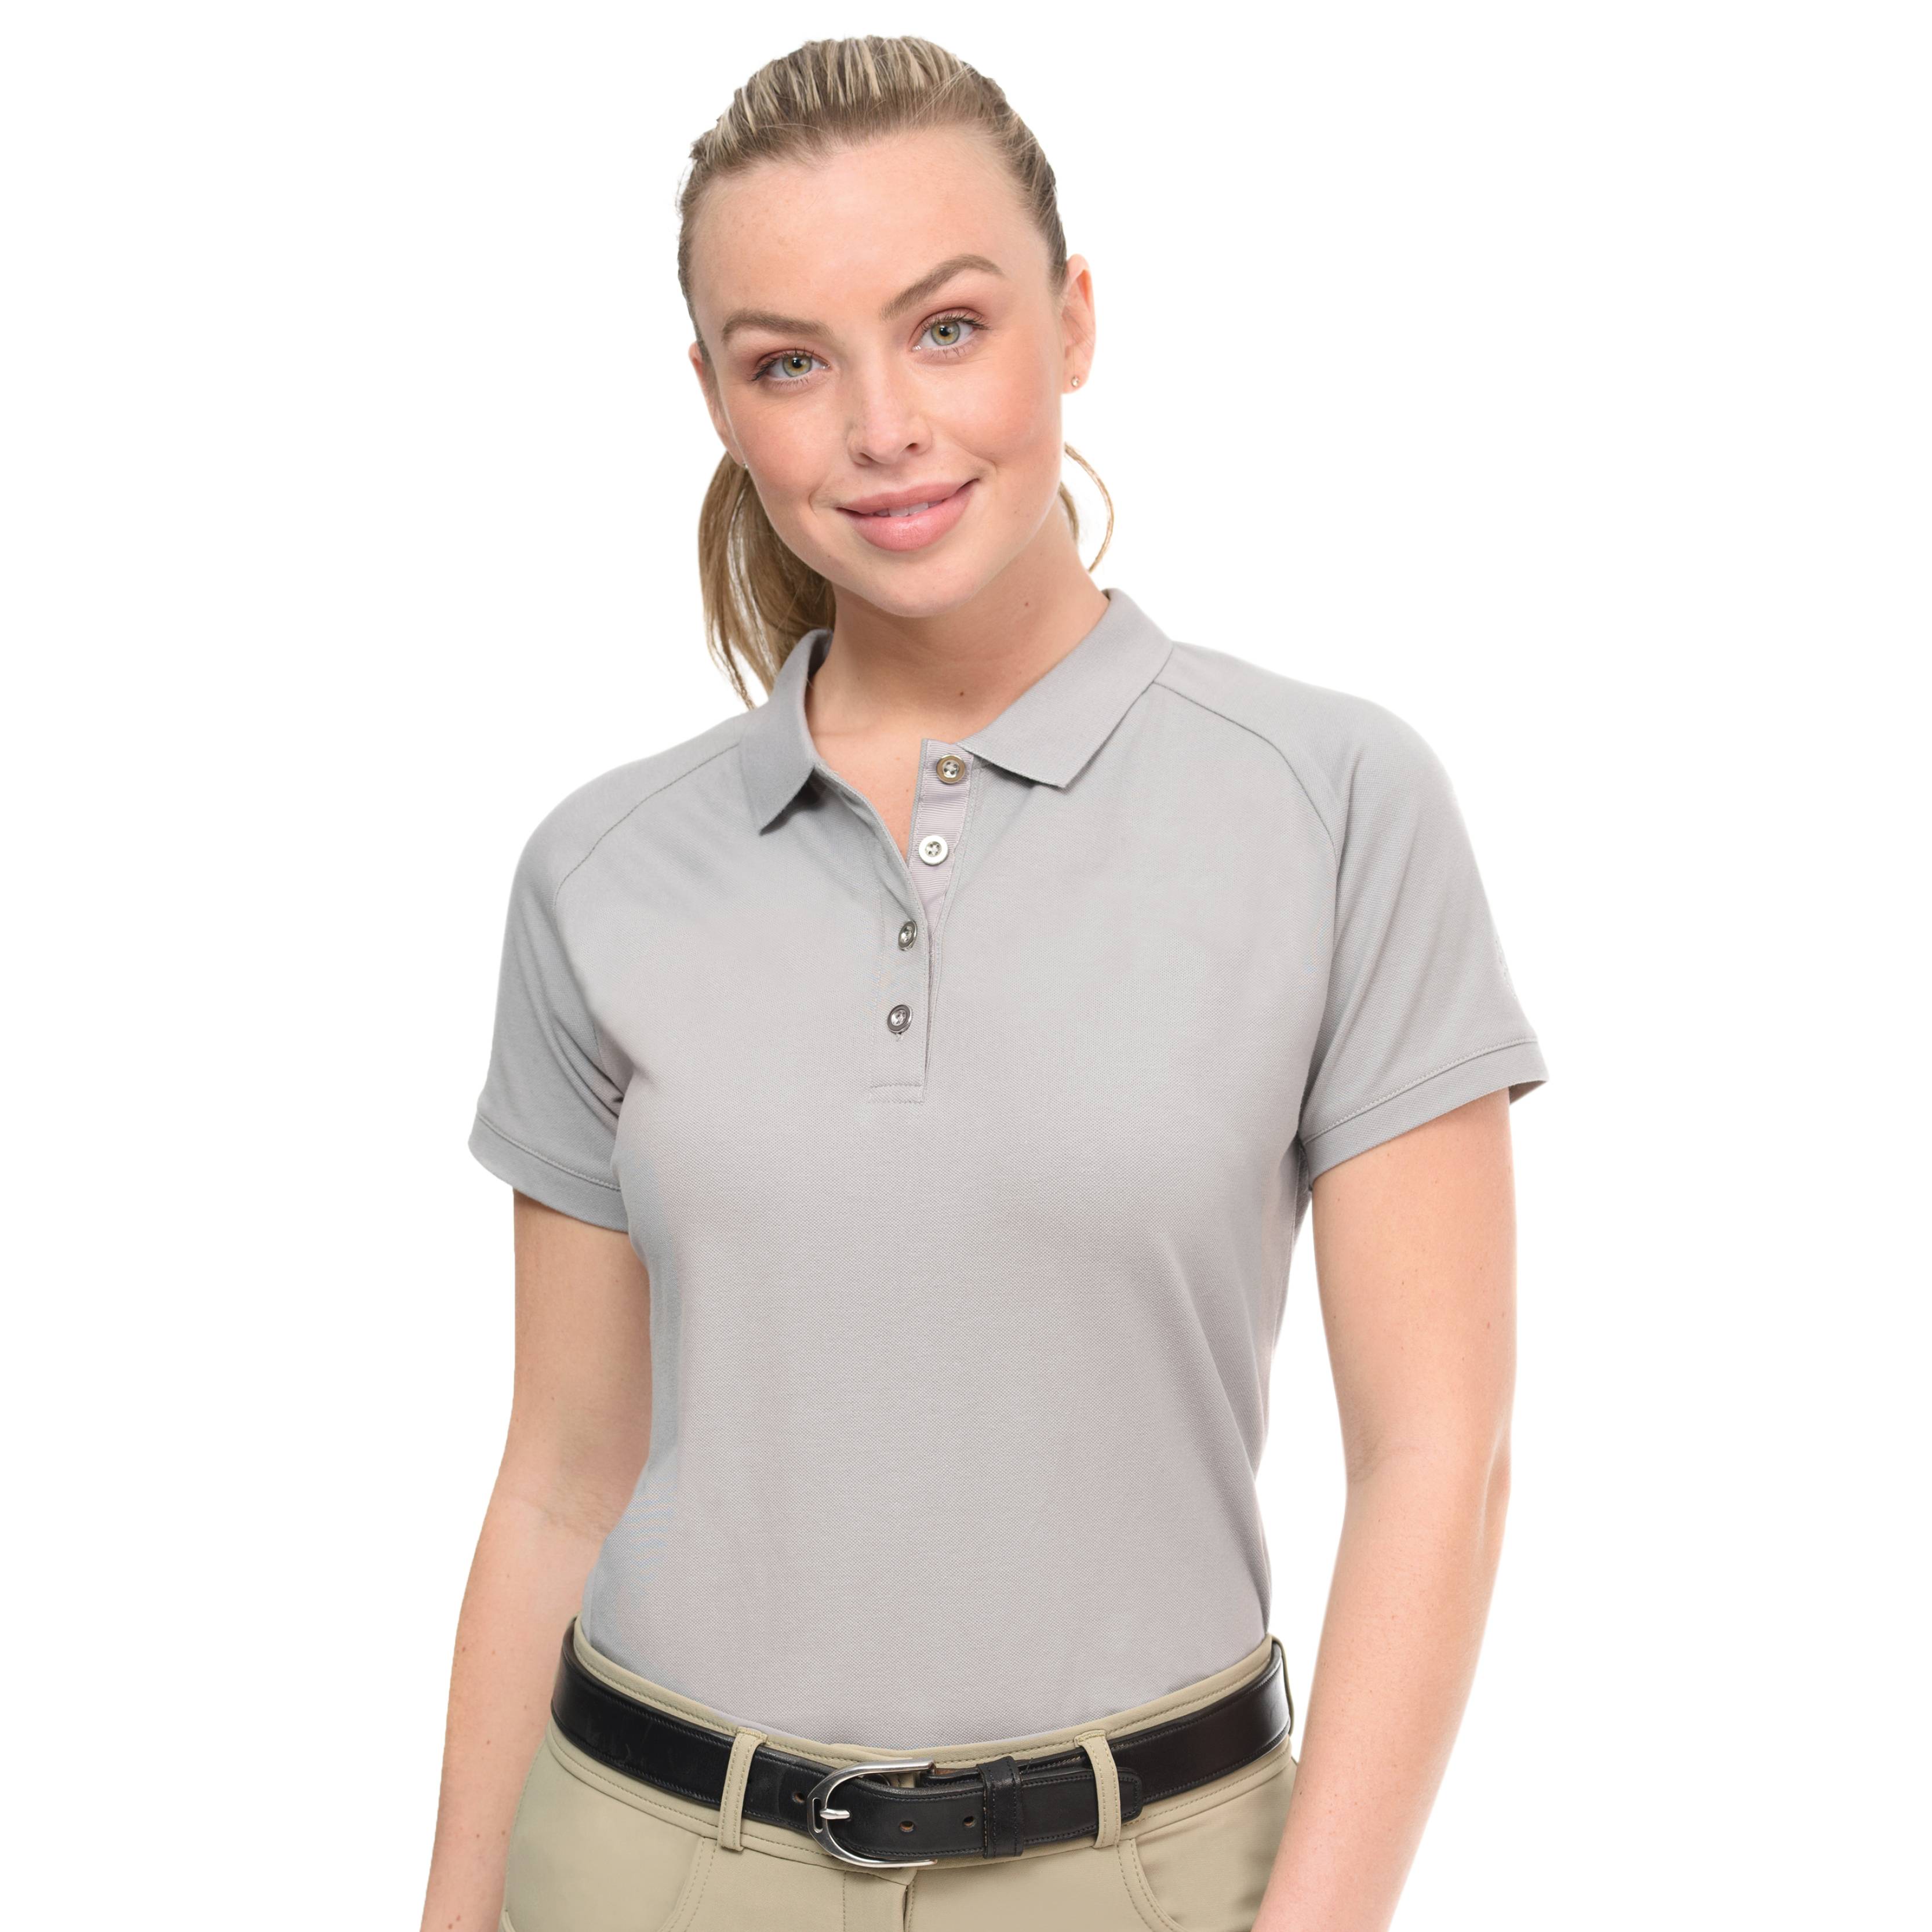 SALE Sherwood Forest Ladies Attingham Short Sleeve Riding Polo Top RRP £29.99 